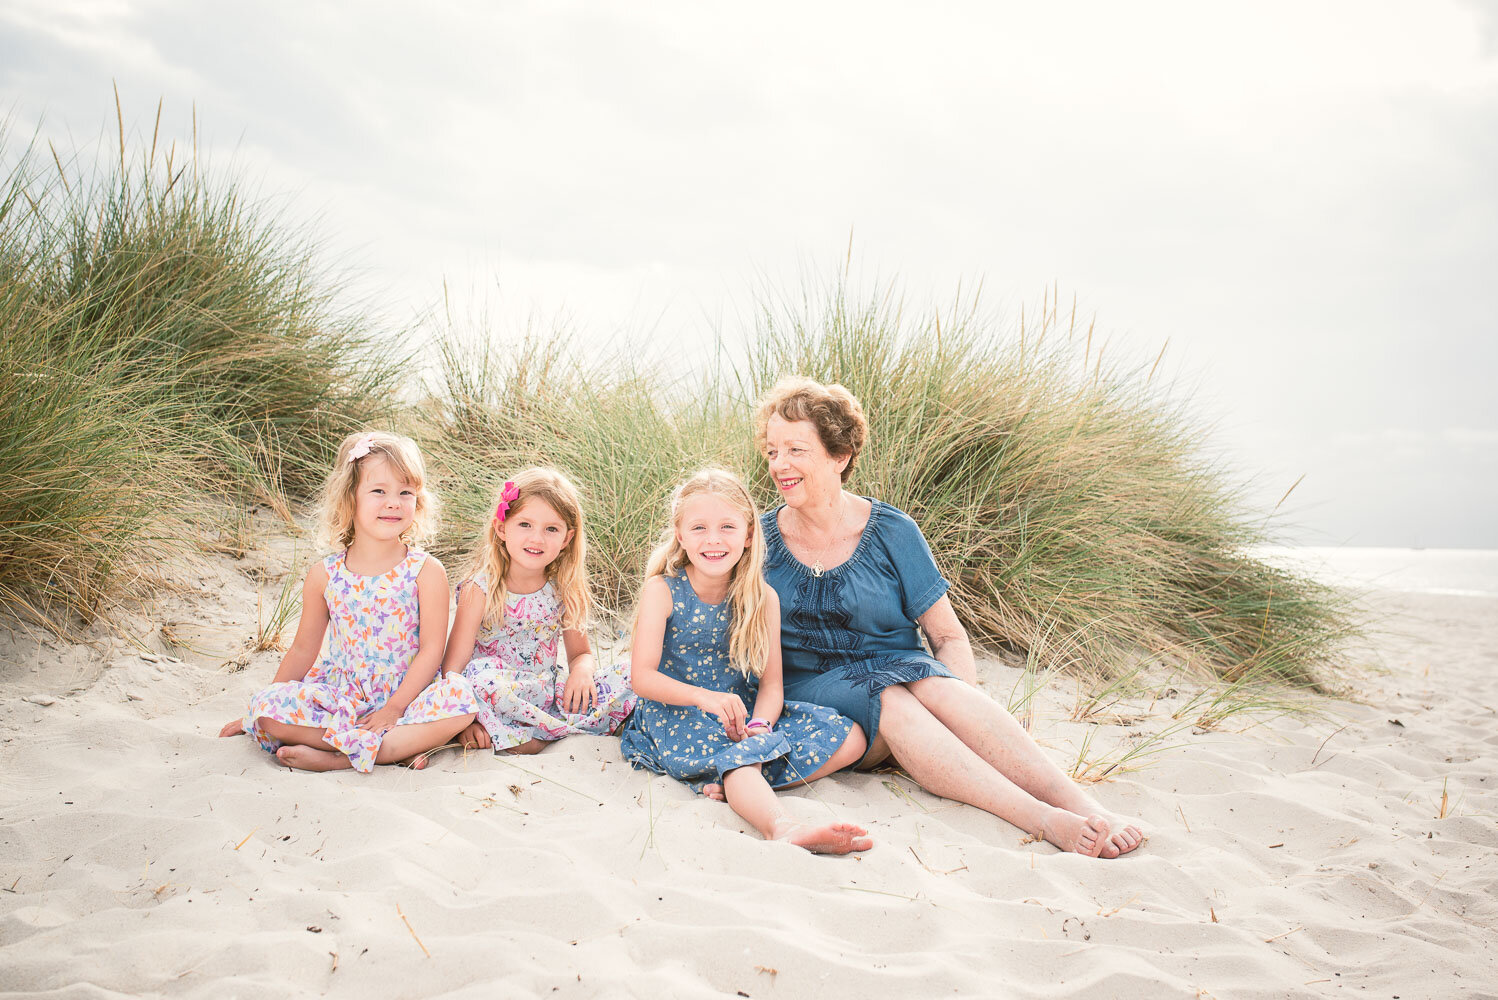 grandma_with_grandaughters_smiling_together_at_beach_melbourne_family_mornington_peninsula_lifestyle_photographer.jpg